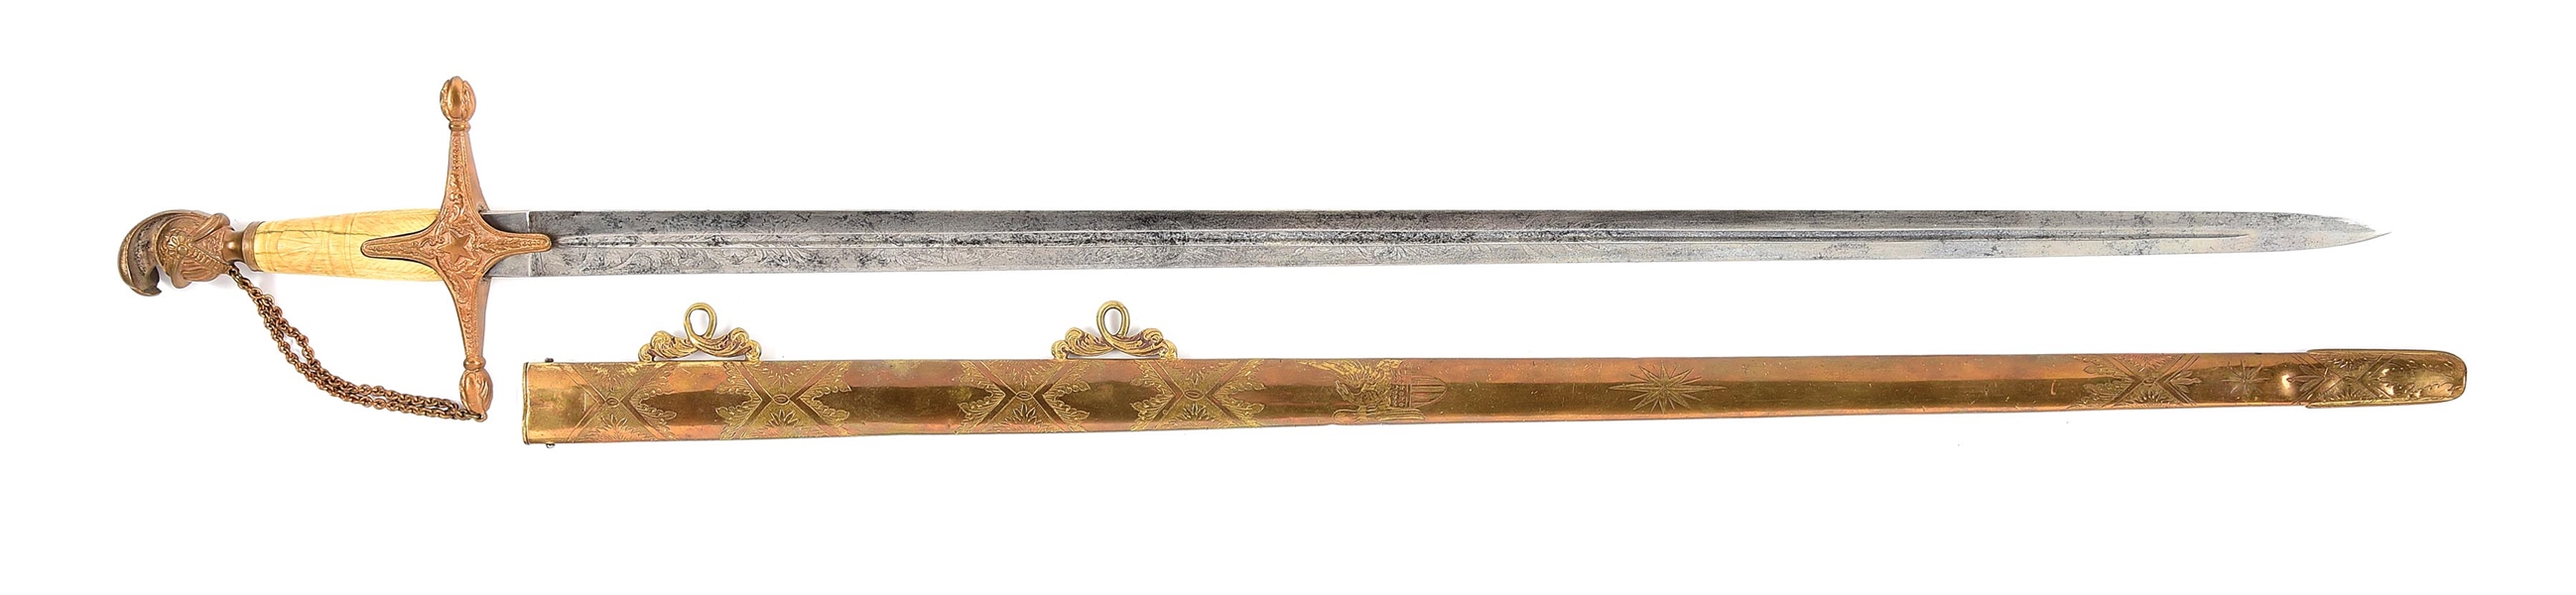 ROBERT & ANDREW CAMPBELL 1840 STYLE MILITIA NCO/OFFICERS SWORD.